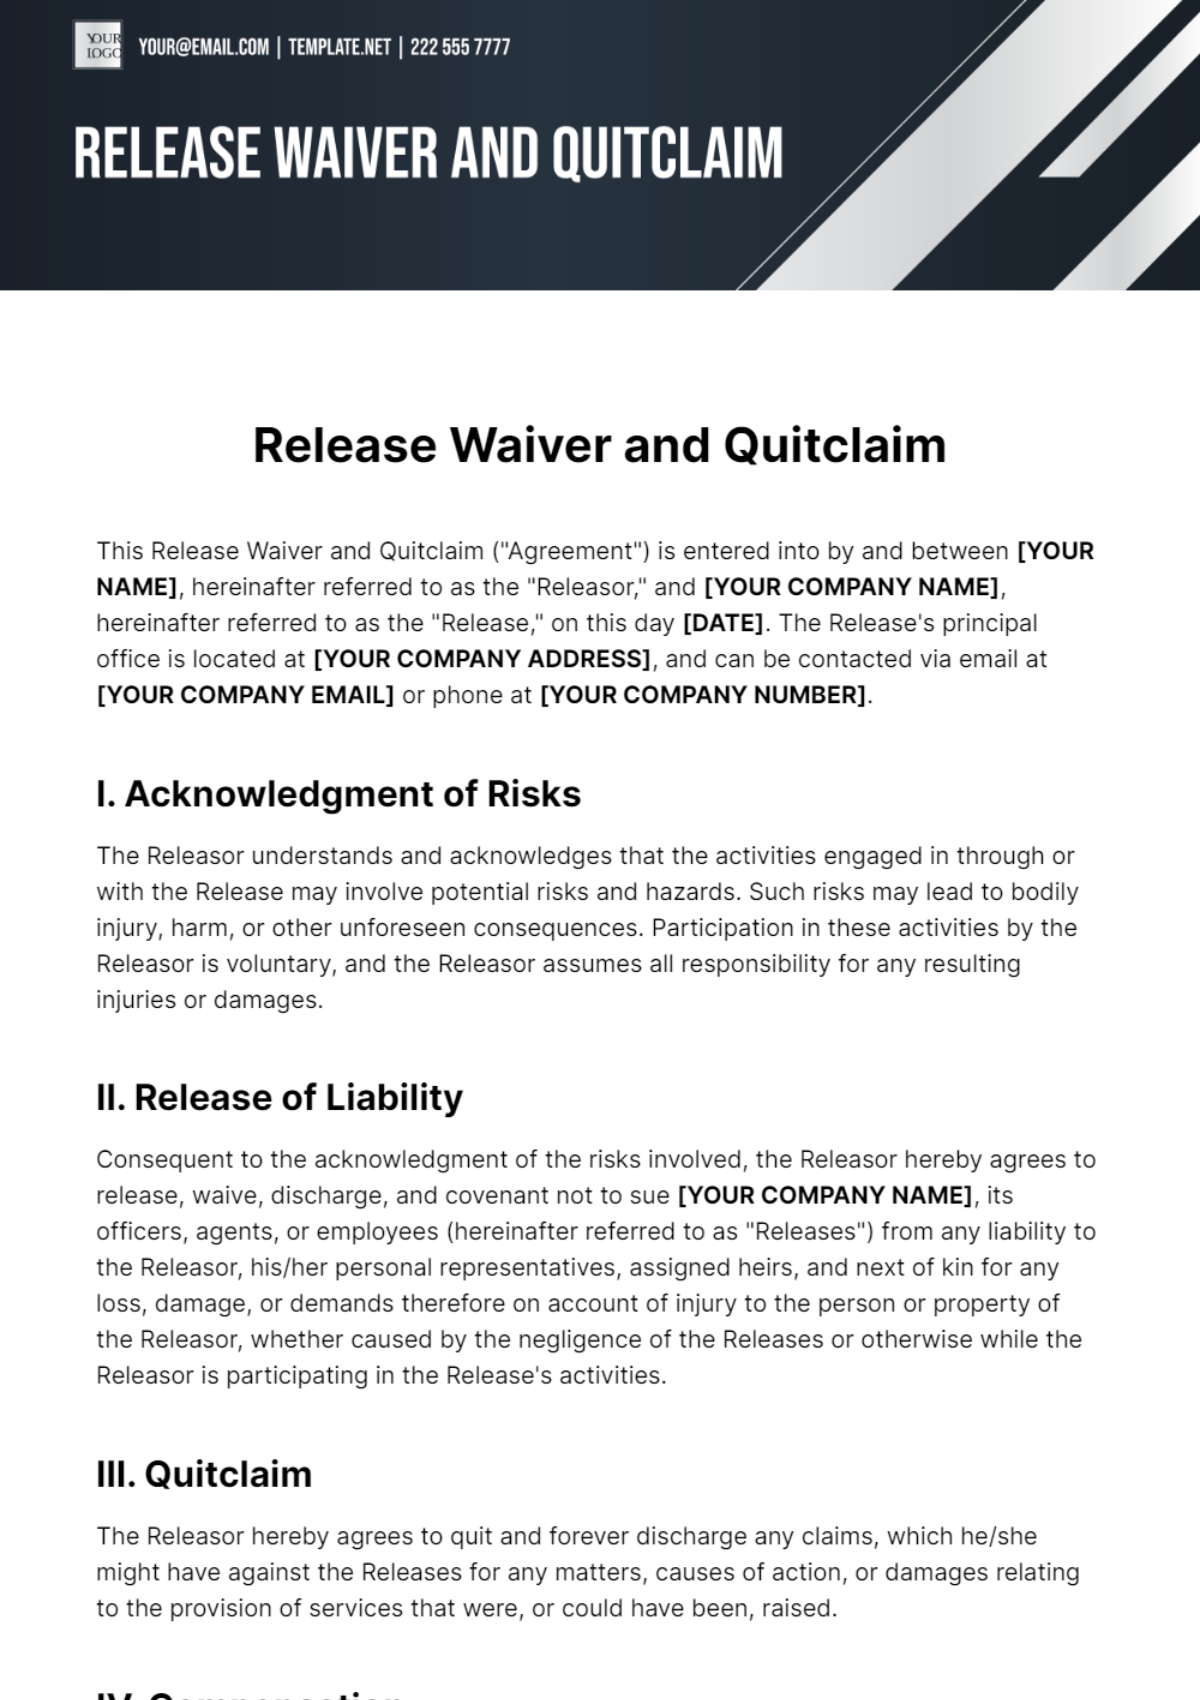 Release Waiver and Quitclaim Template